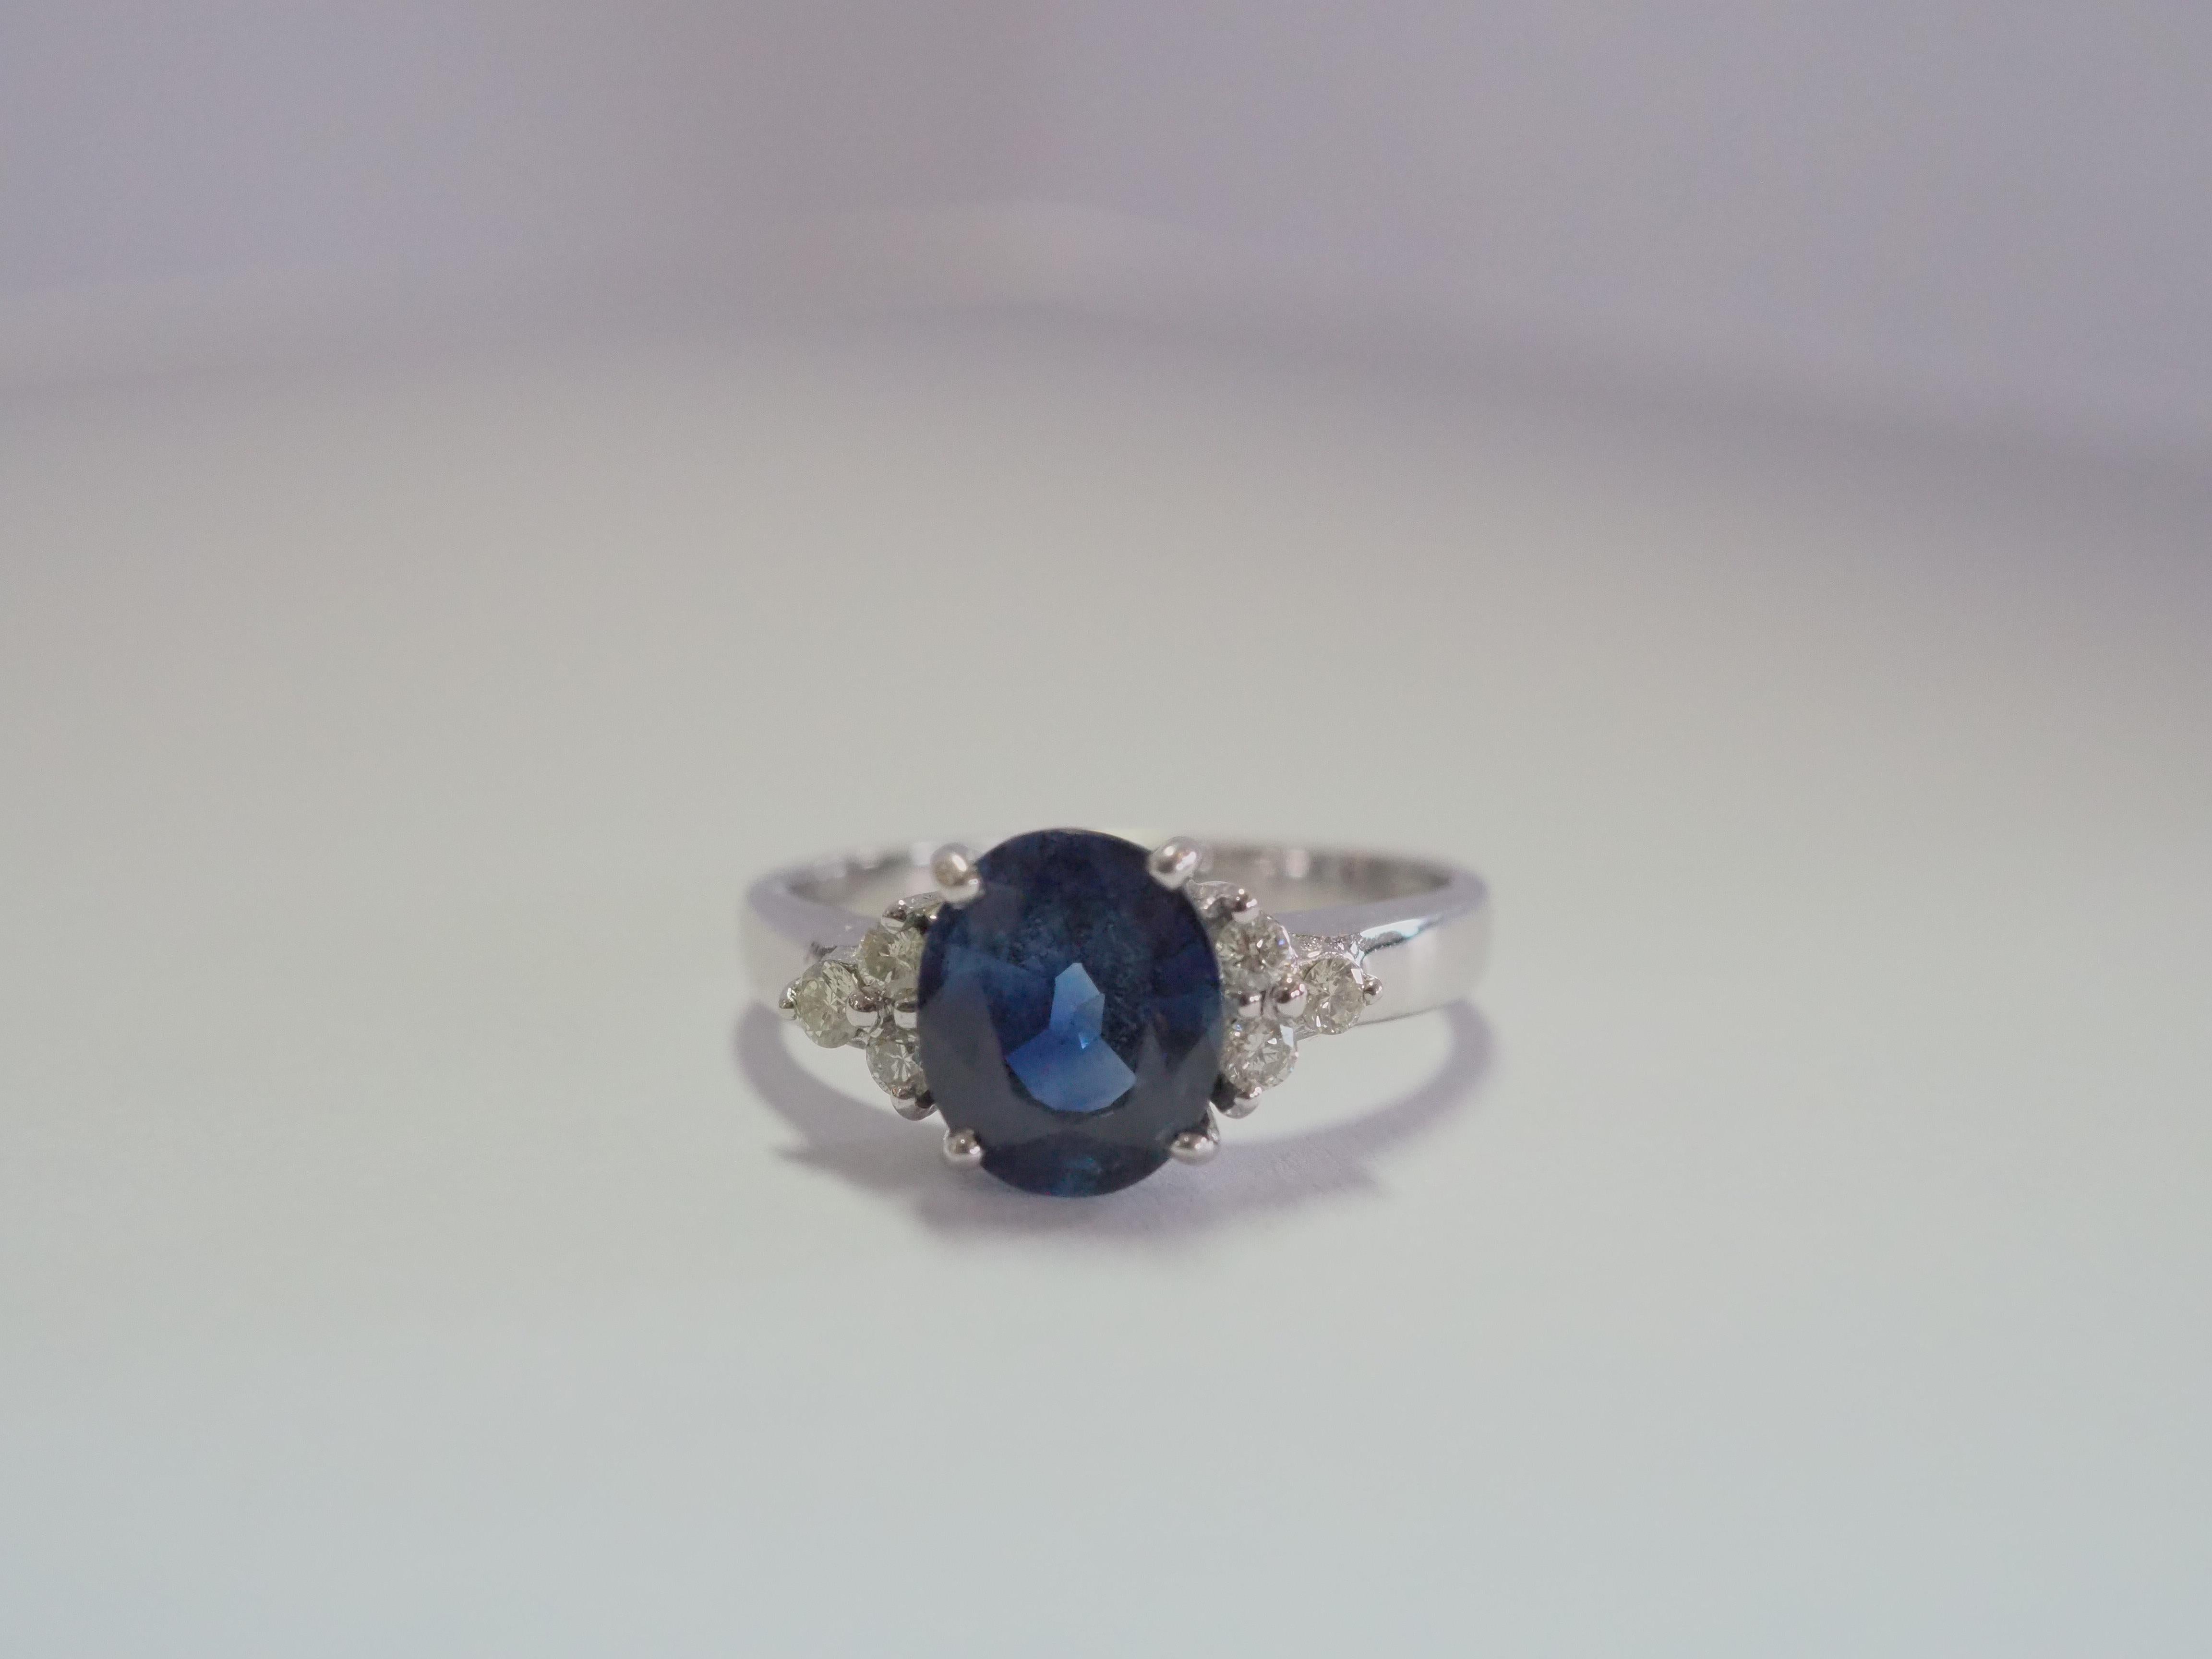 A stunning Thai blue sapphire ring. The blue sapphire has a bit of green tint but is very clean with no visible eye inclusions. The diamonds here are brilliant and of very good quality, clear and colorless. Set in beautiful mount of 18k solid white